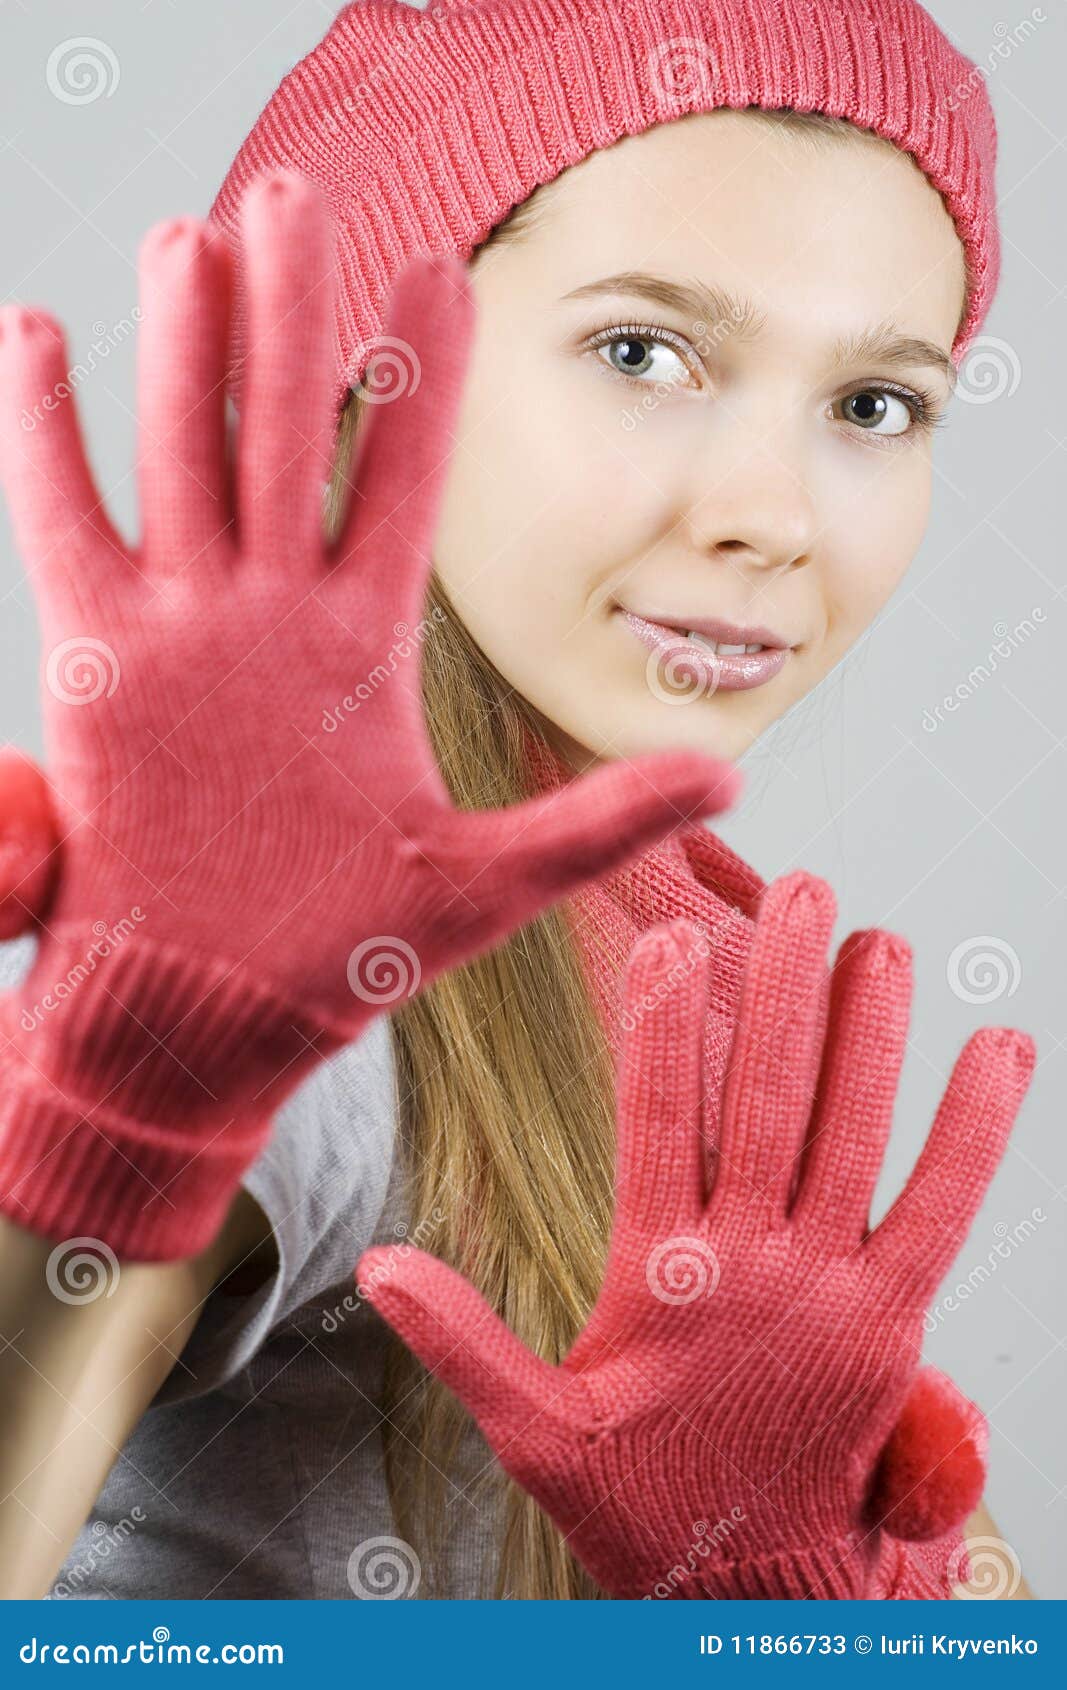 Keep out the cold stock image. Image of head, close, glove - 11866733